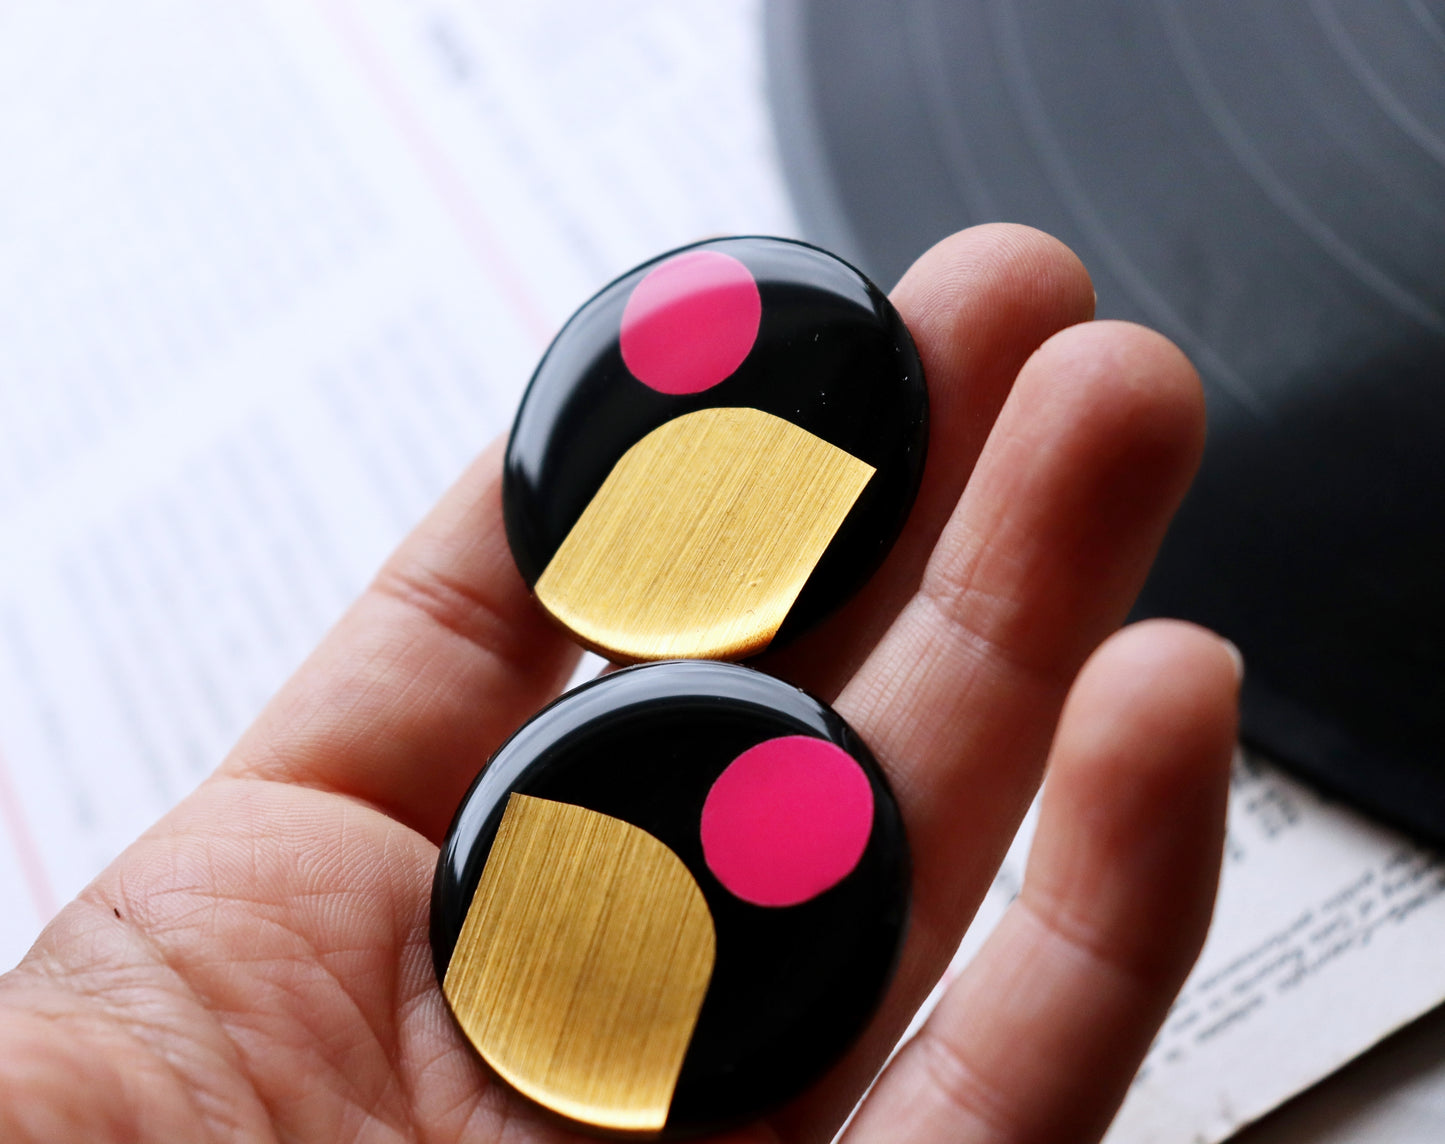 20% OFF / Large statement stud earrings in gold & fuchsia / upcycled vinyl record jewellery